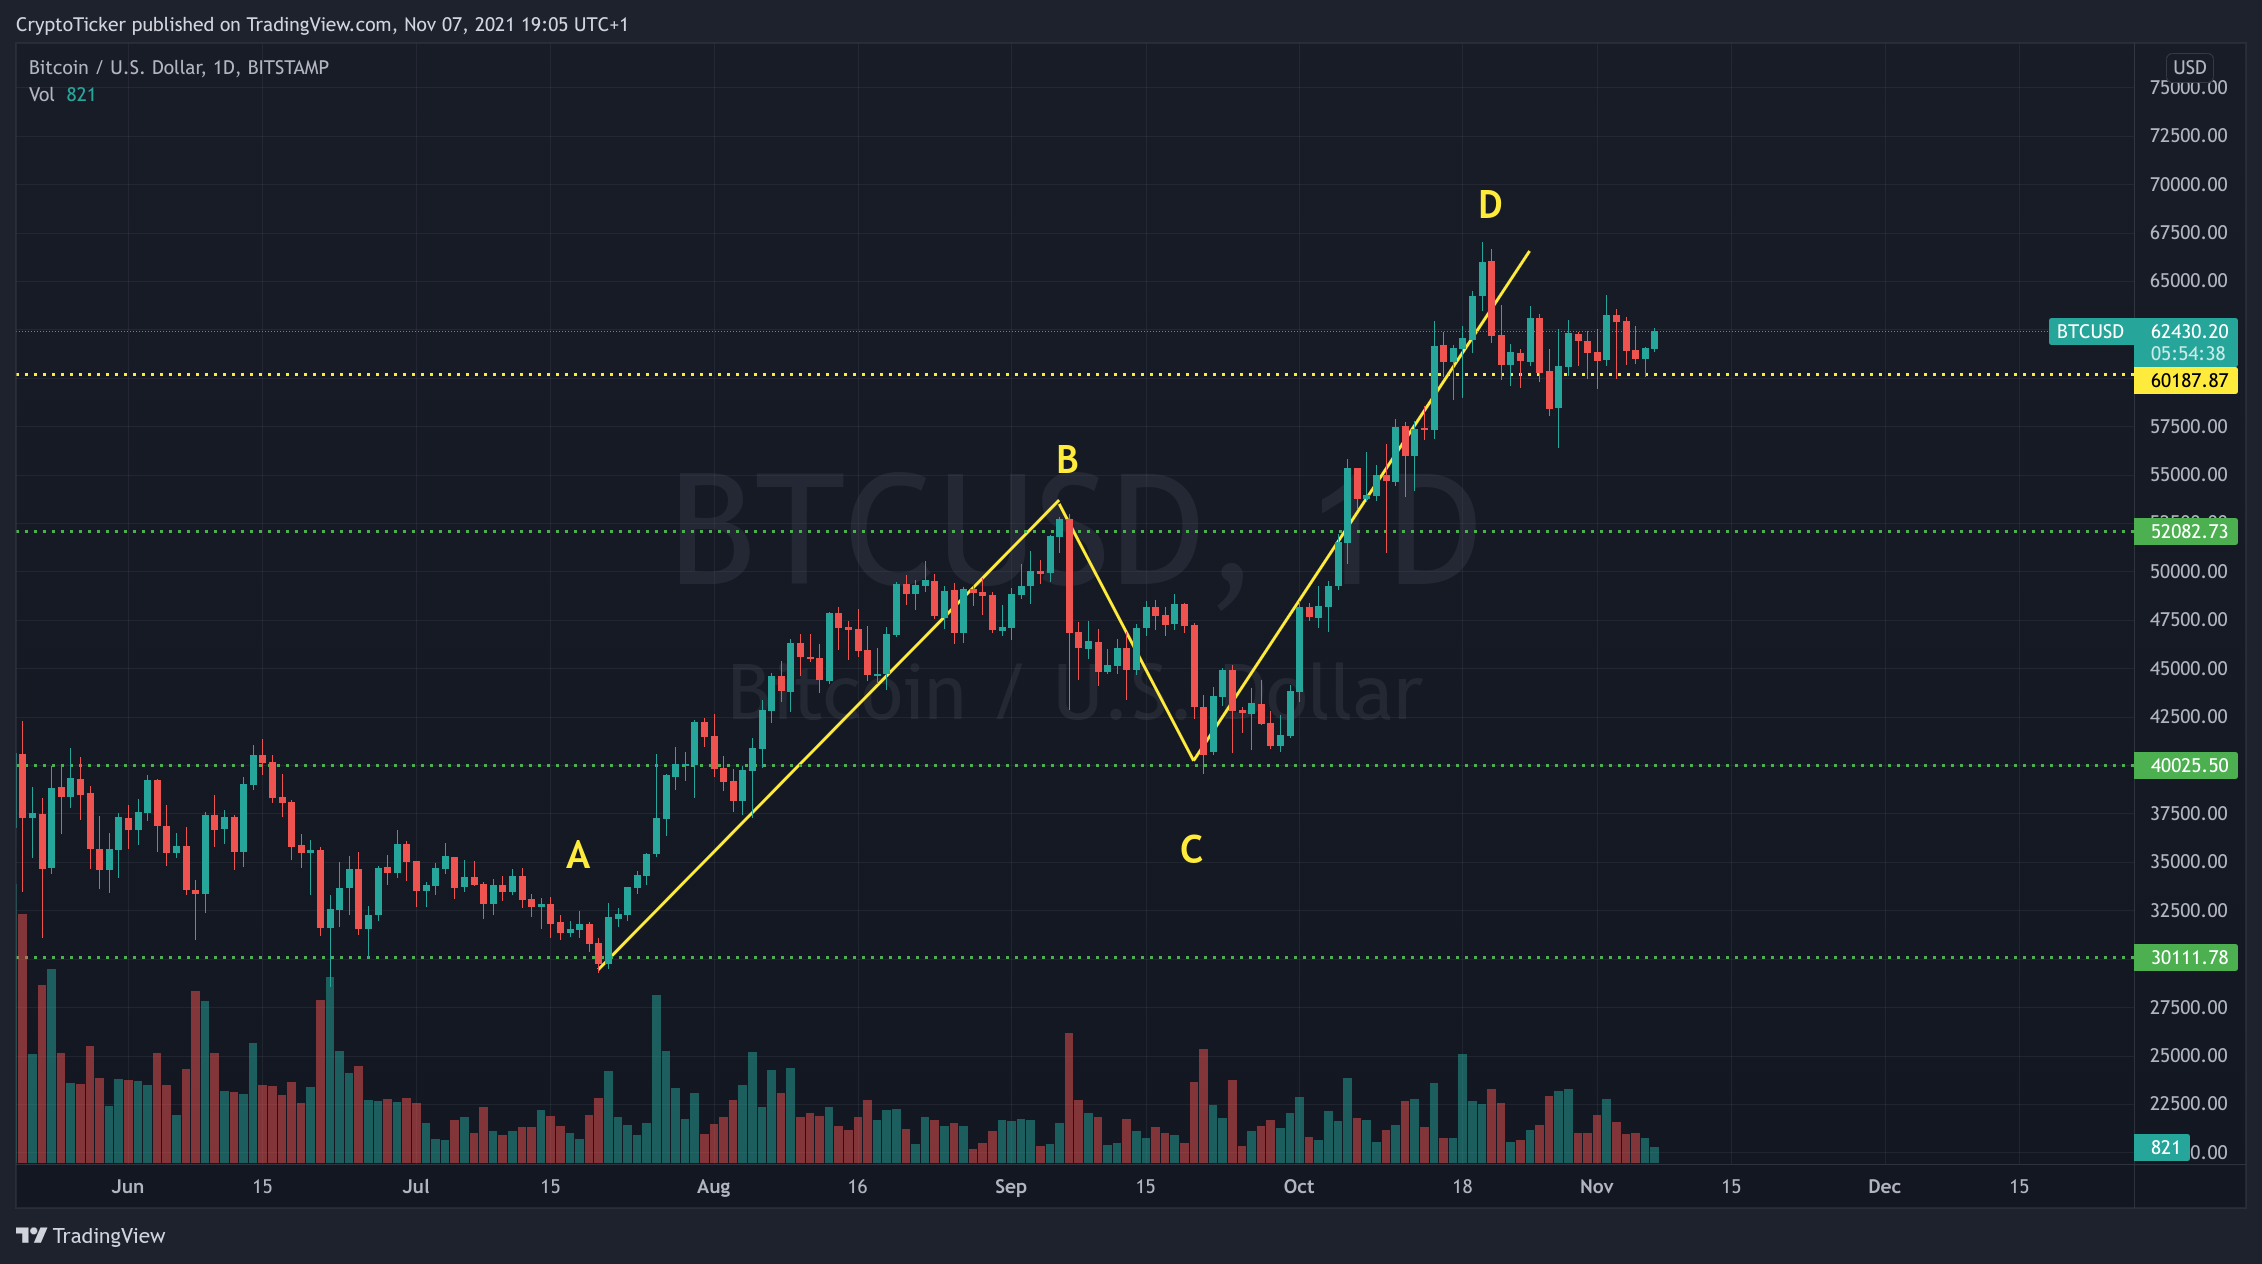 BTC/USD 1-day chart showing the price action of Bitcoin